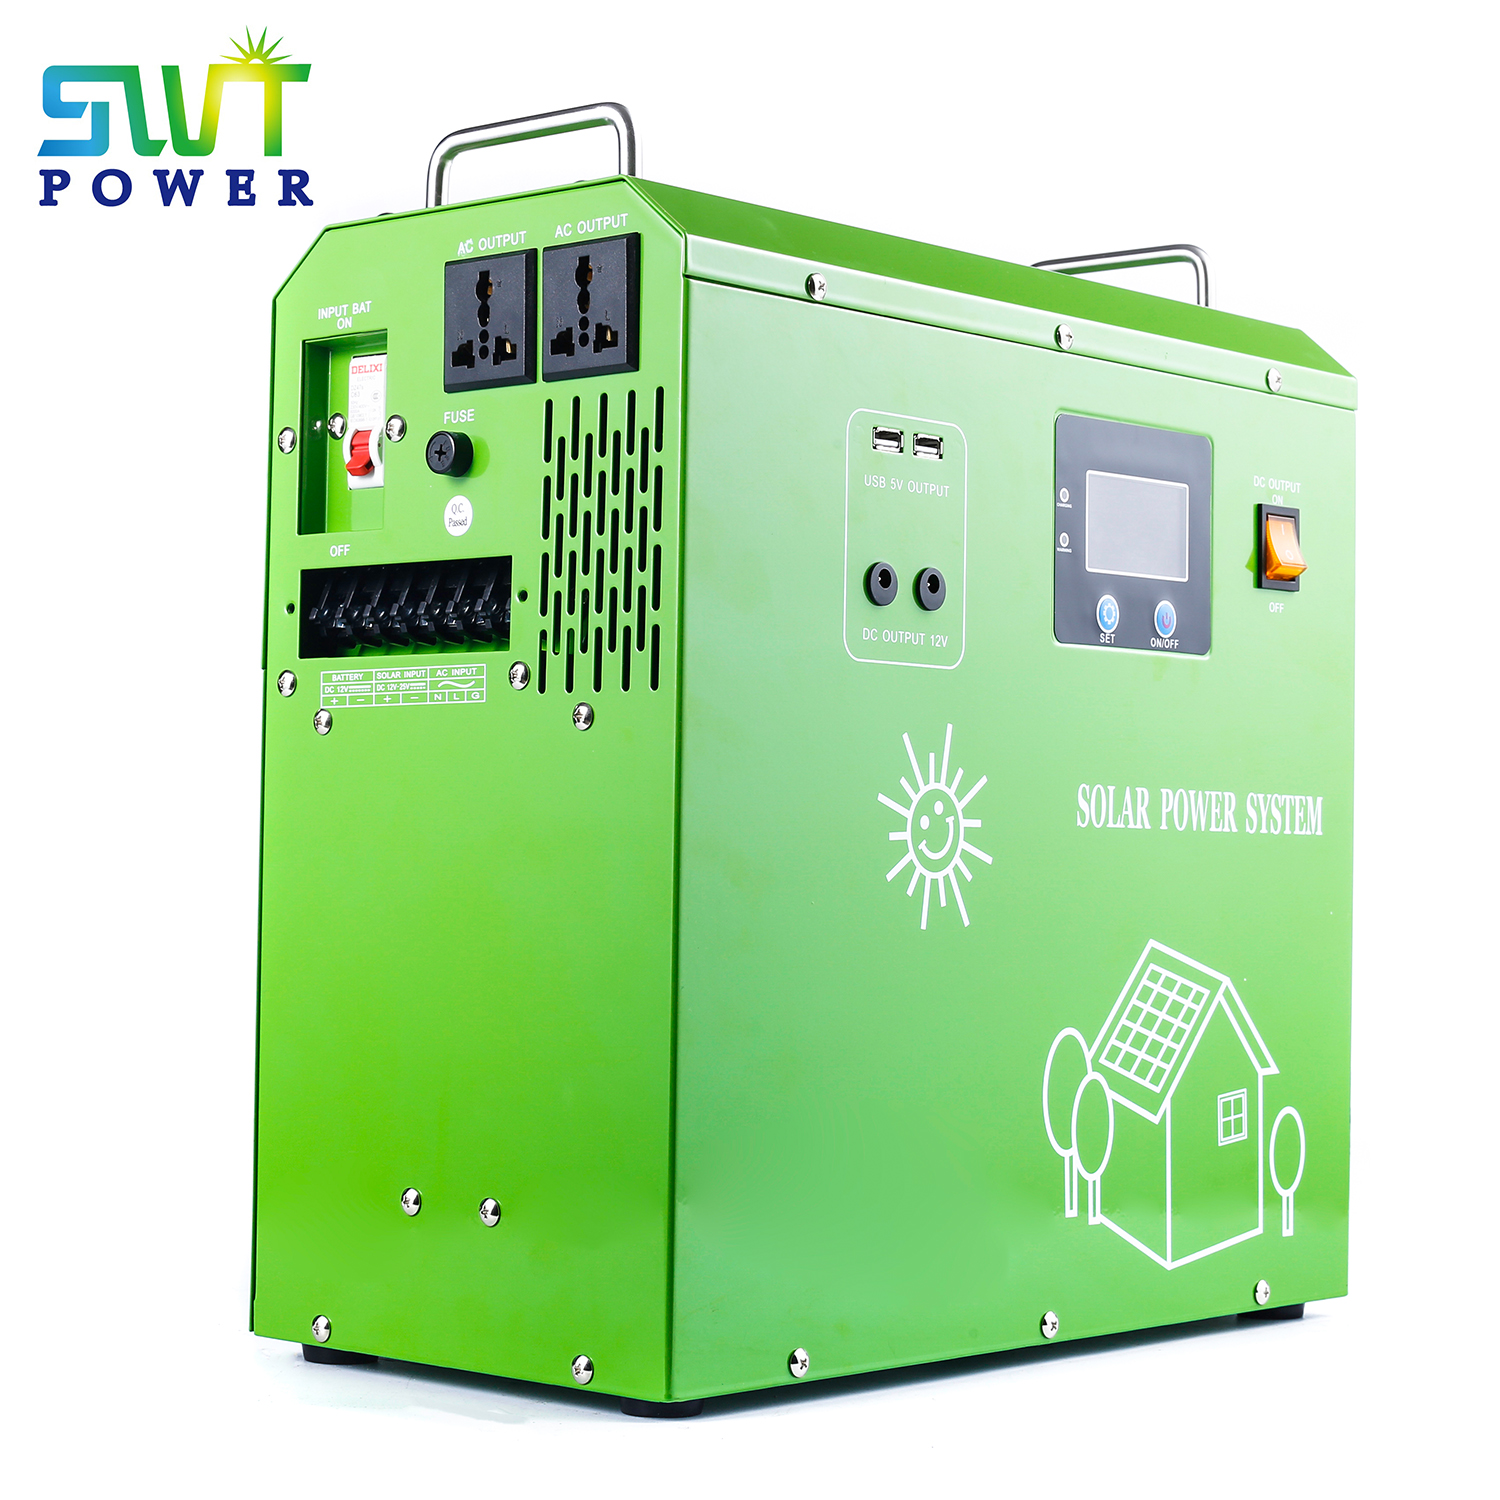 all-in-one-solar-power-system-solar-portable-equipment